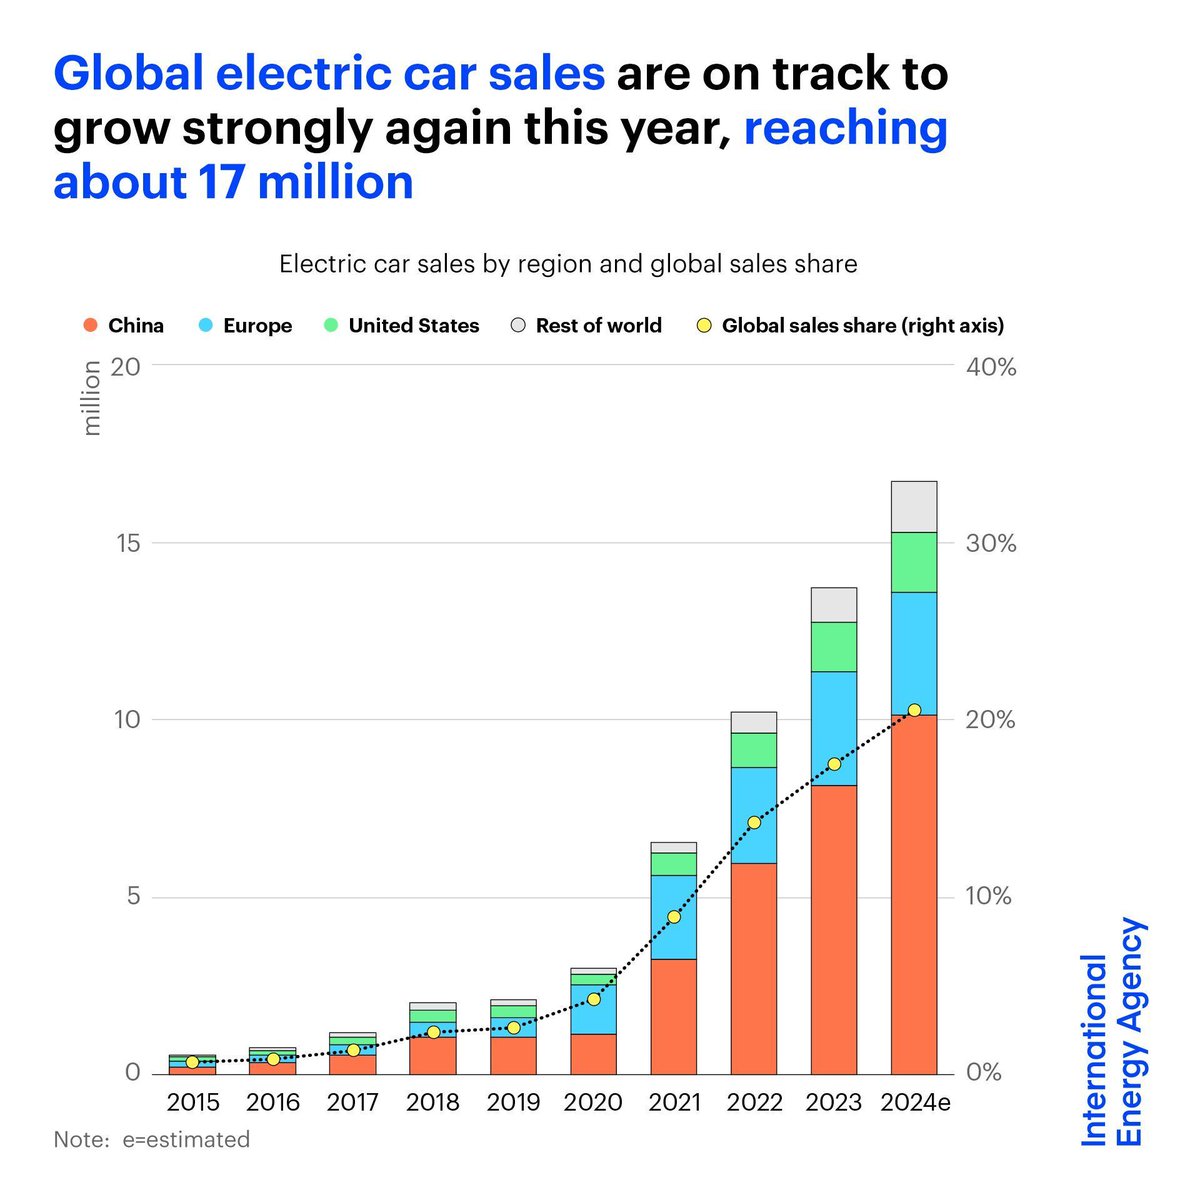 Global electric car sales are on track to grow strongly again this year, reaching about 17 million With more than 1 in 5 cars sold worldwide in 2024 set to be electric, the rise of EVs is transforming the auto industry & the energy sector Read more → iea.li/3yf1TTa